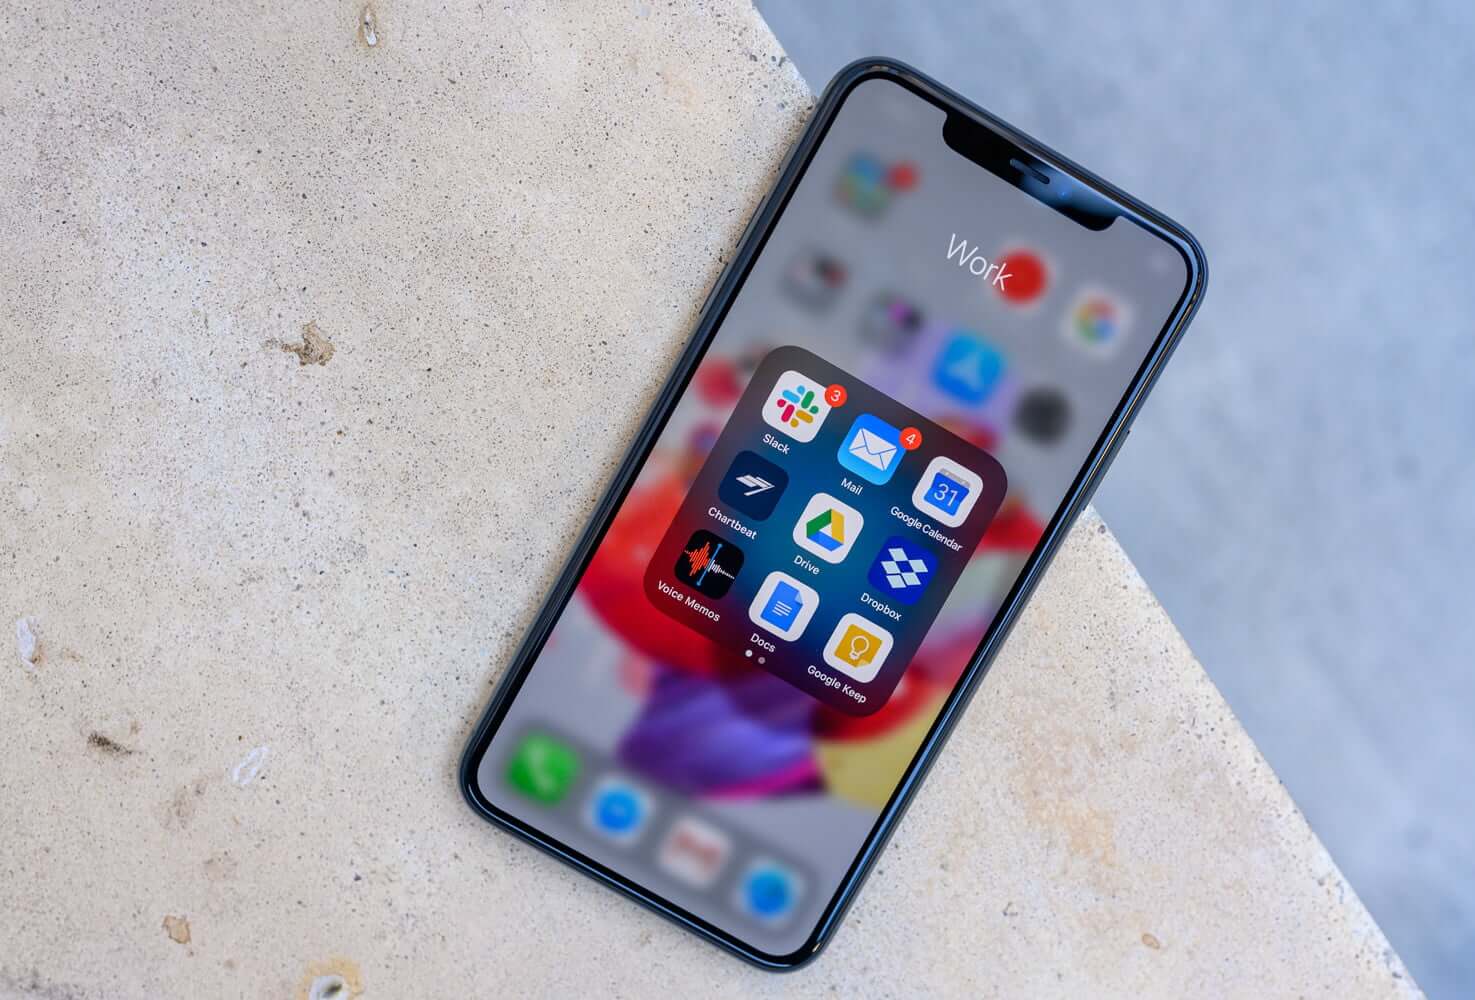 Some iPhone owners are reporting that iOS 13 closes background